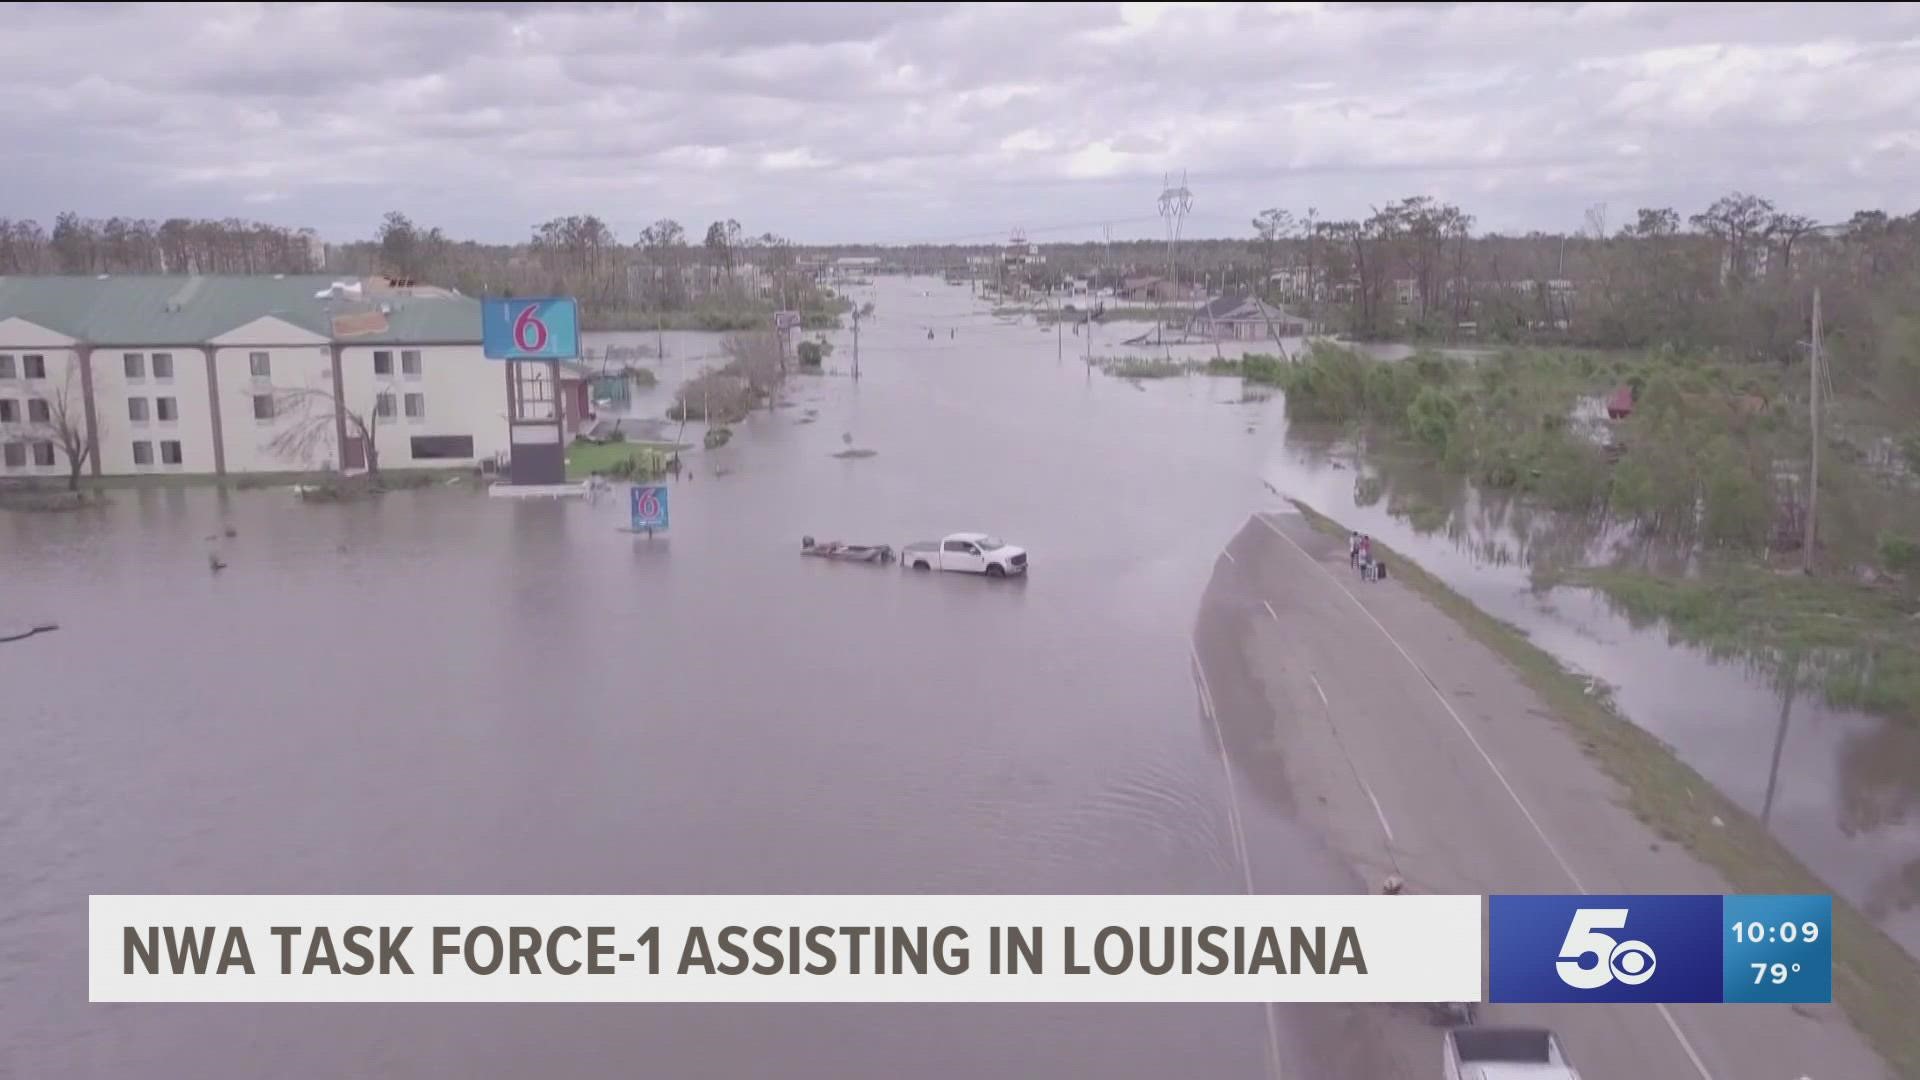 While down there, Task Force-1 members will work with United States Army Reserve teams and agencies in an effort to help the citizens of Louisiana.